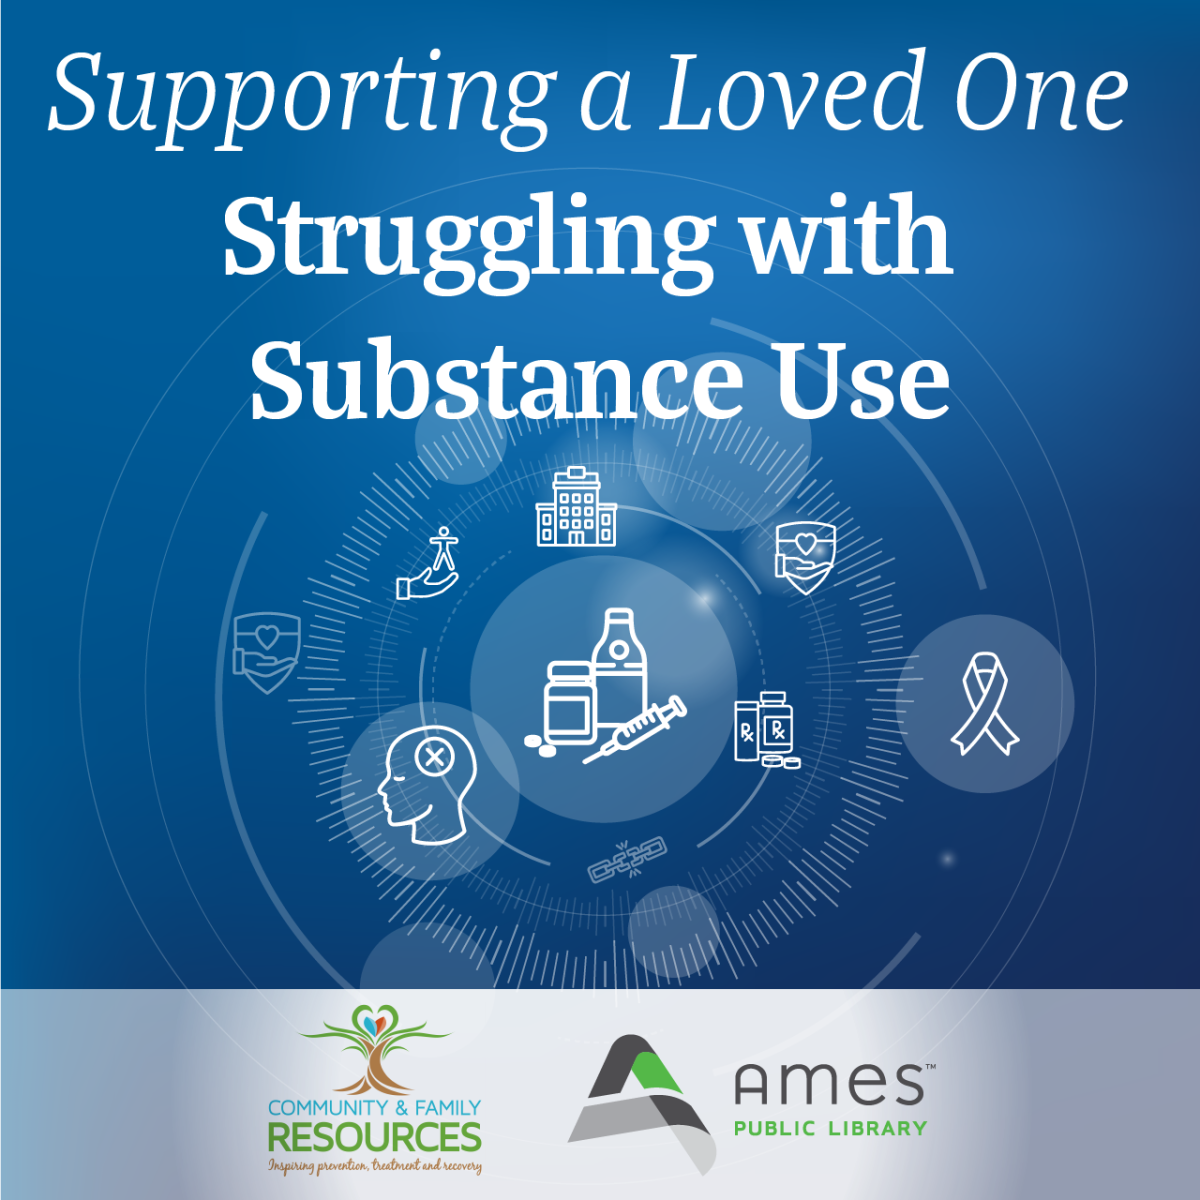 Supporting a Loved One Struggling with Substance Use